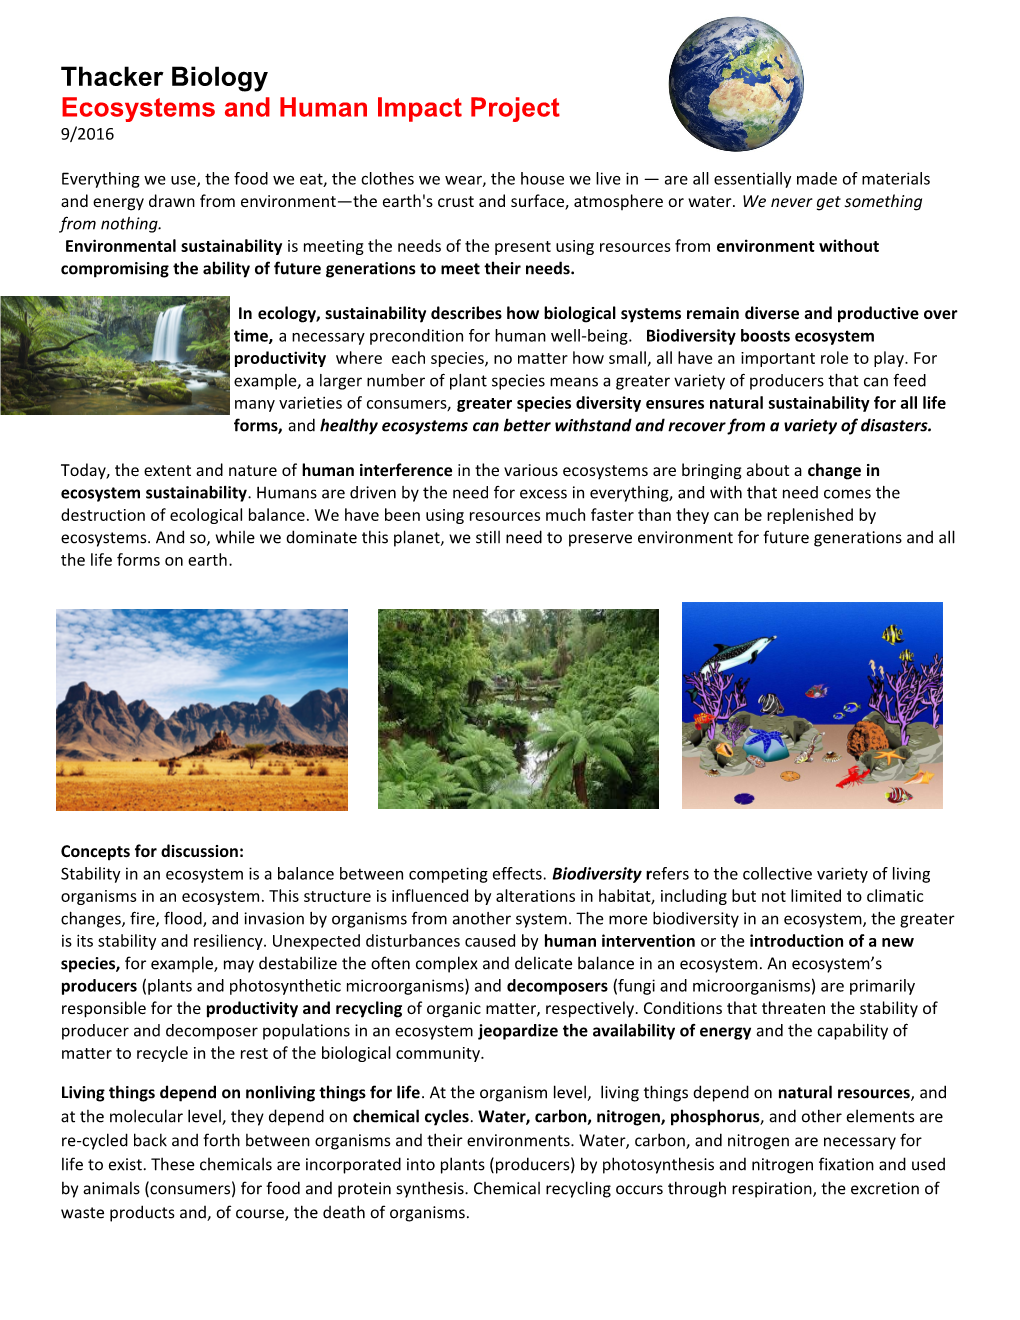 Ecosystems and Human Impact Project